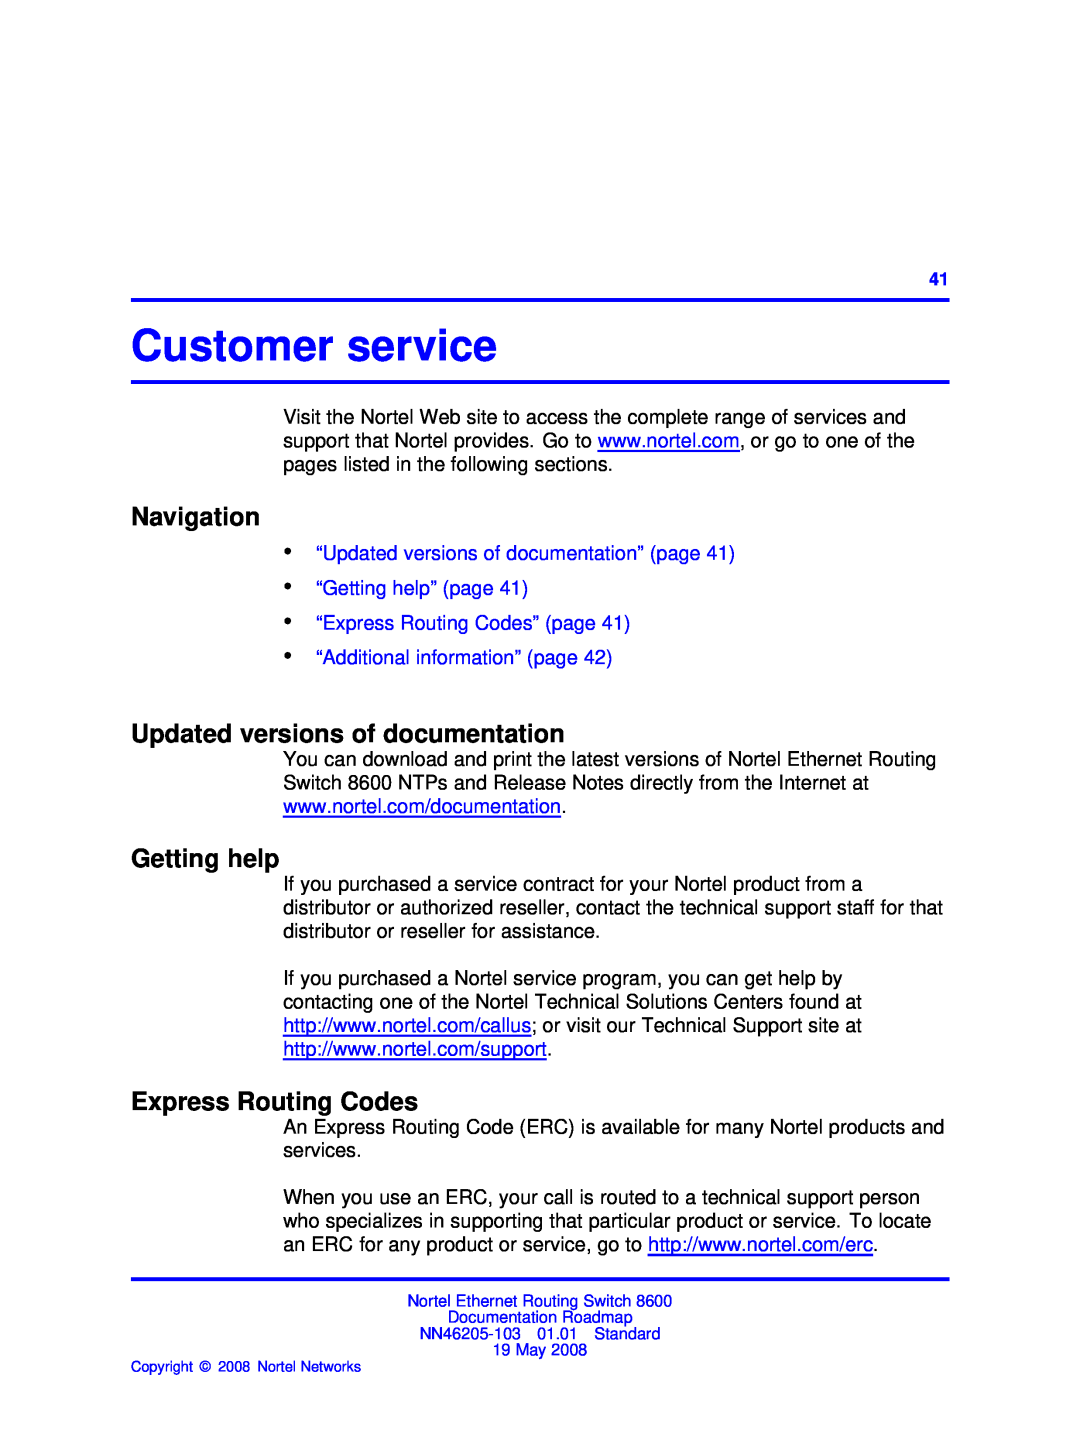 Nortel Networks 8600 Customer service, Updated versions of documentation, Getting help, Express Routing Codes, Navigation 